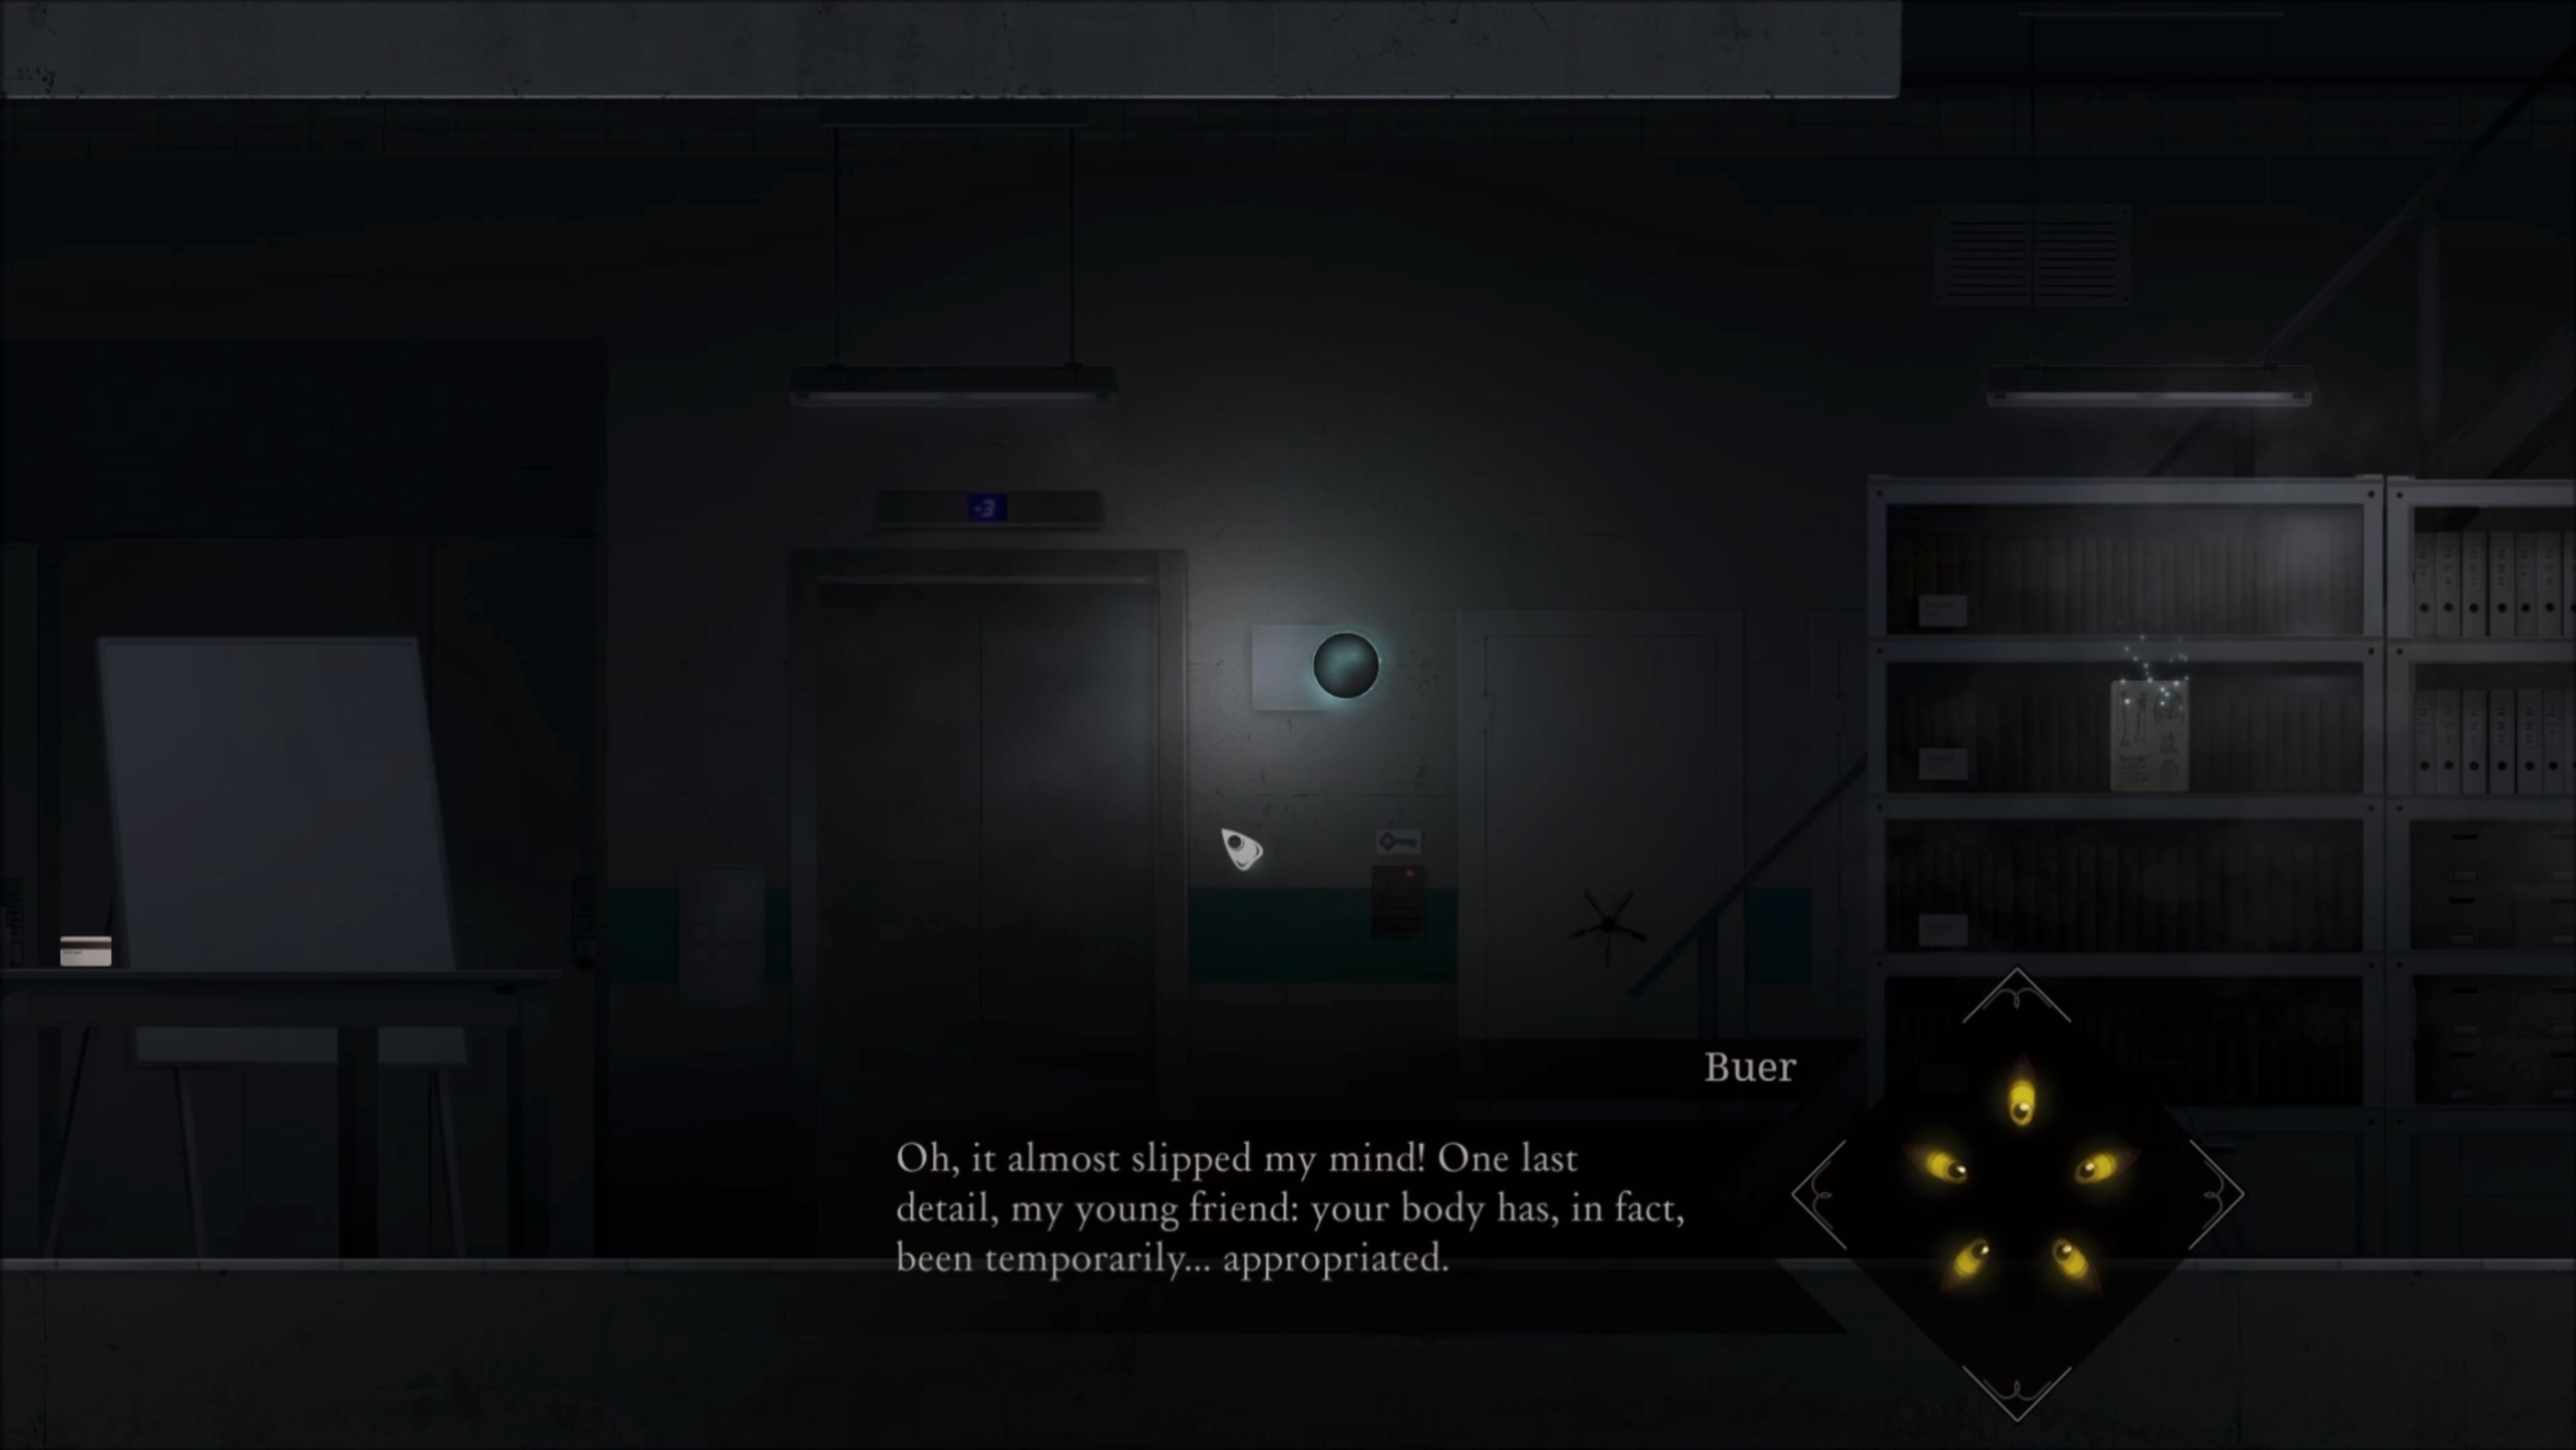 Gameplay screenshot of the Goetia 2 game. You can see the dialog text of one of the charactersi in the game saying, &ldquo;Oh, it almost slipped my mind! One last detail, my young friend: your body has, in fact, been temporarily&hellip; appropriated.&rdquo;